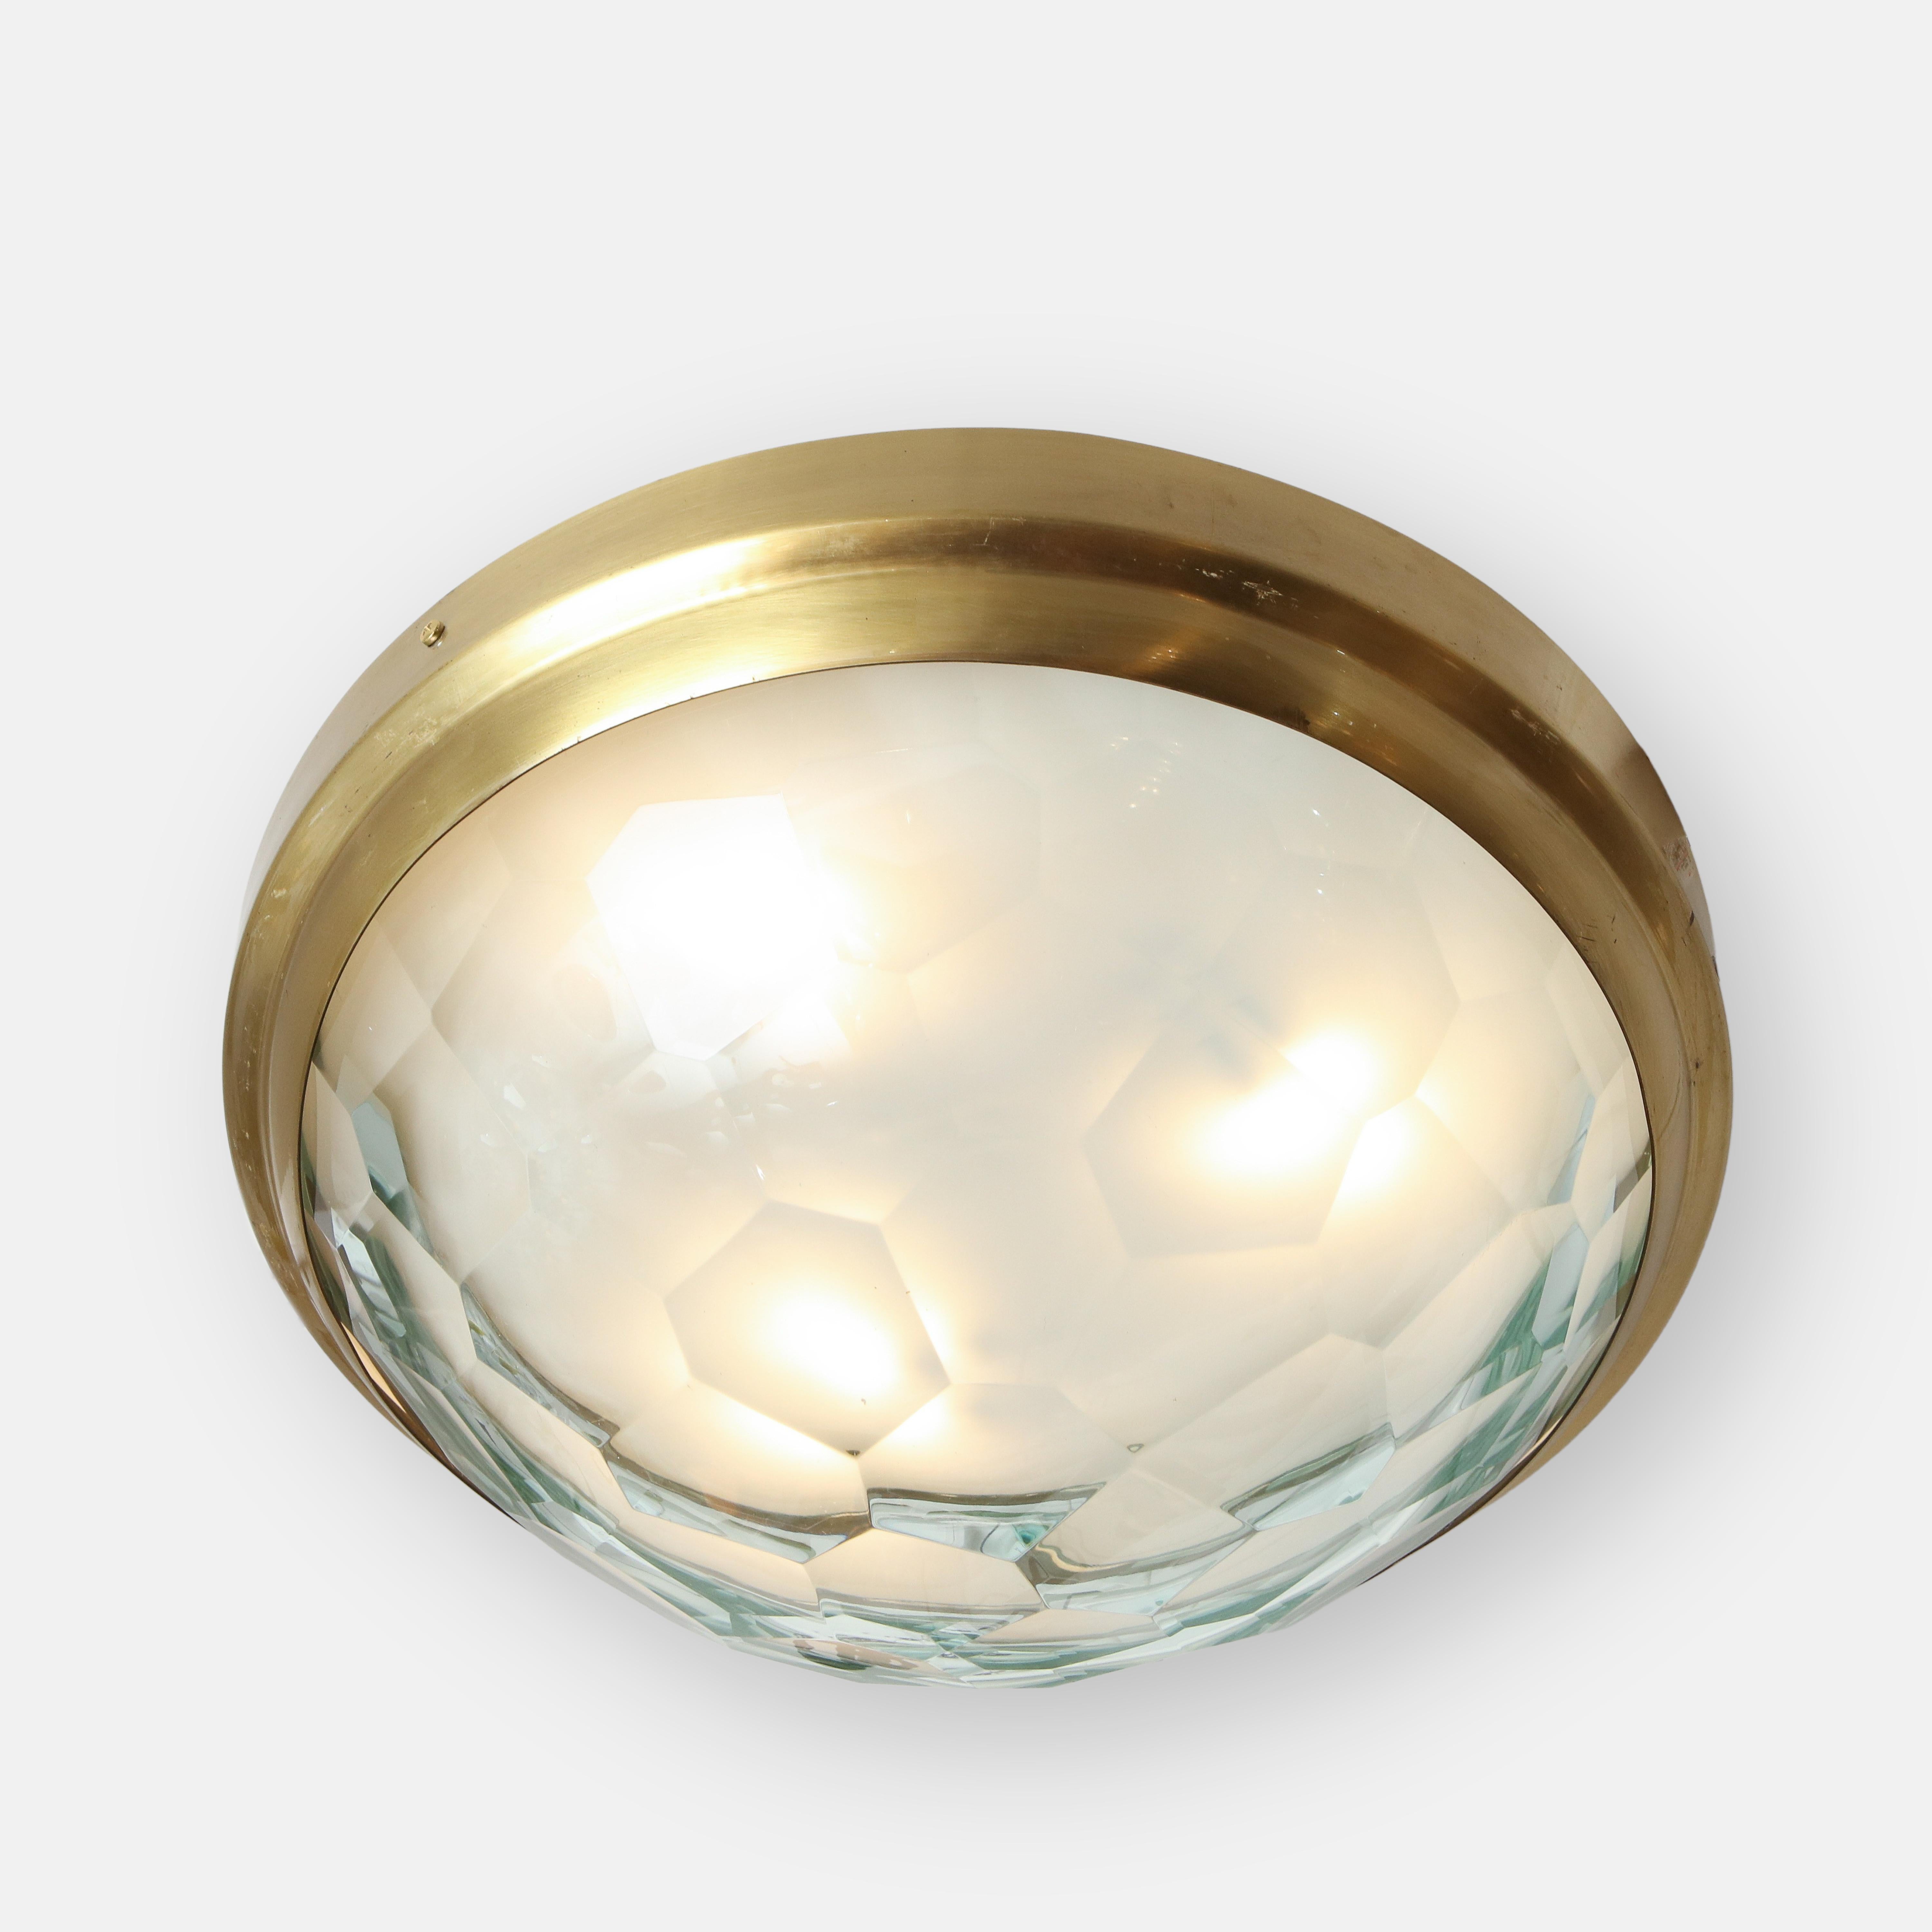 Elegant large flush mount ceiling light in the style of Fontana Arte with faceted glass diffuser on brass mount, Italy, 1960s. This lovely ceiling light reflects the light beautifully as it diffuses it through the faceted glass.